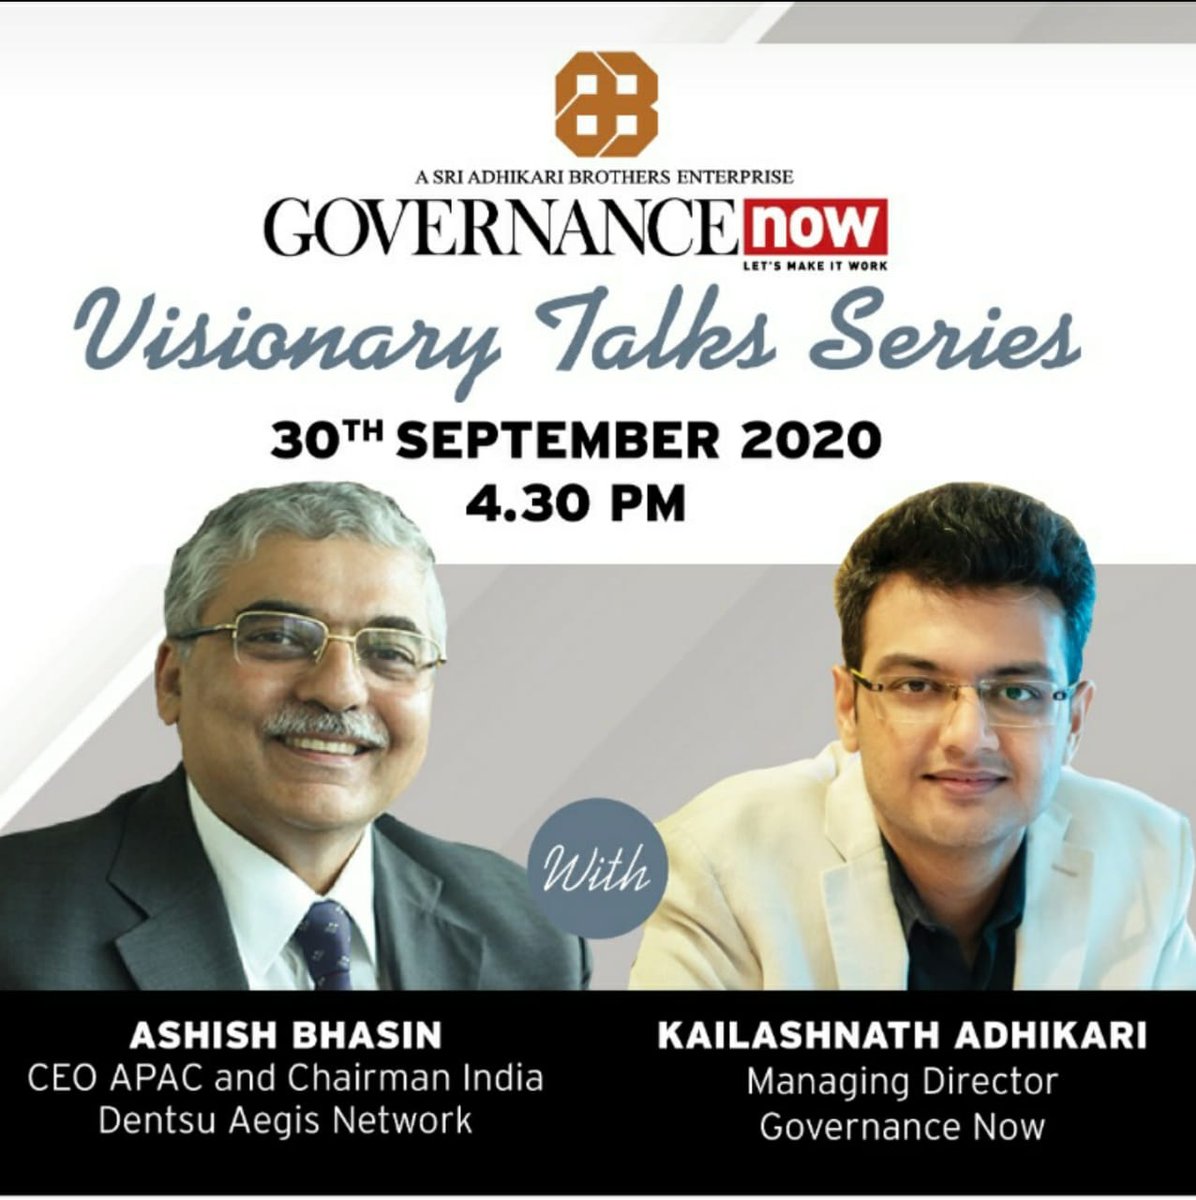 Join @ashishbhasin1 in conversation with @KAdhikaari at 4.30 PM today on @governancenow’s #VisionaryTalks where he discusses the scope for governance, policies in advertising and much more! Register Now: bit.ly/3jcmz1J